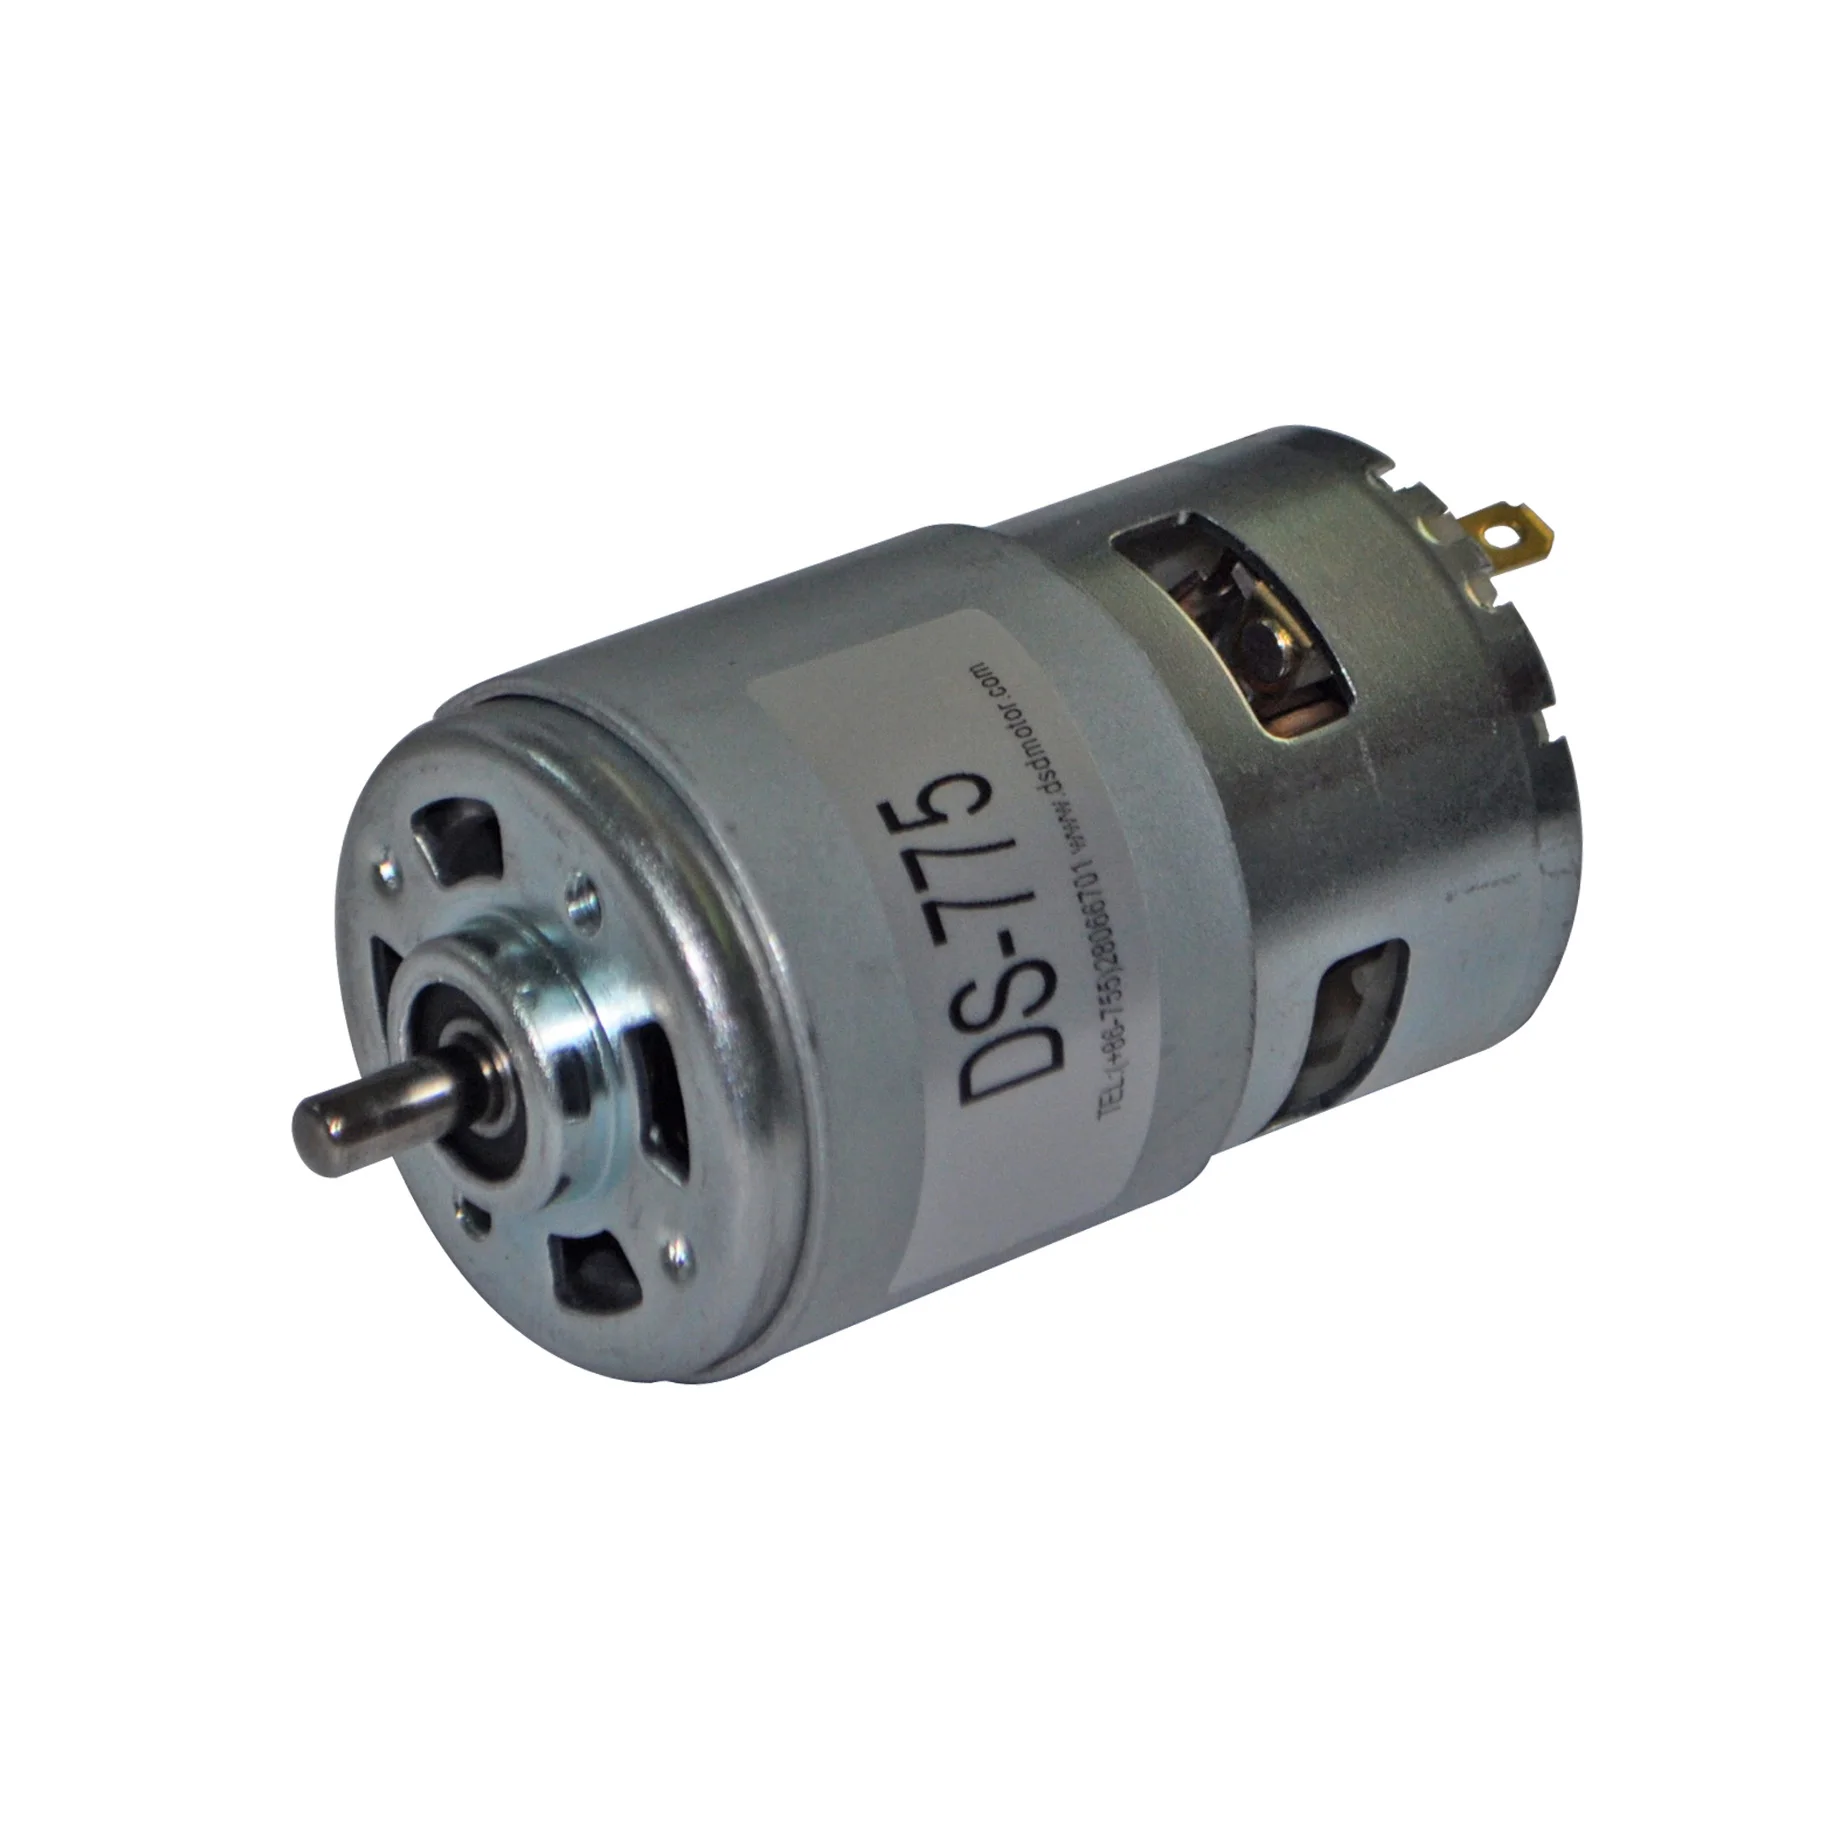 DSD Motor 775 12V Low RPM High Torque DC Motor For  Electric Bike And Power Tool